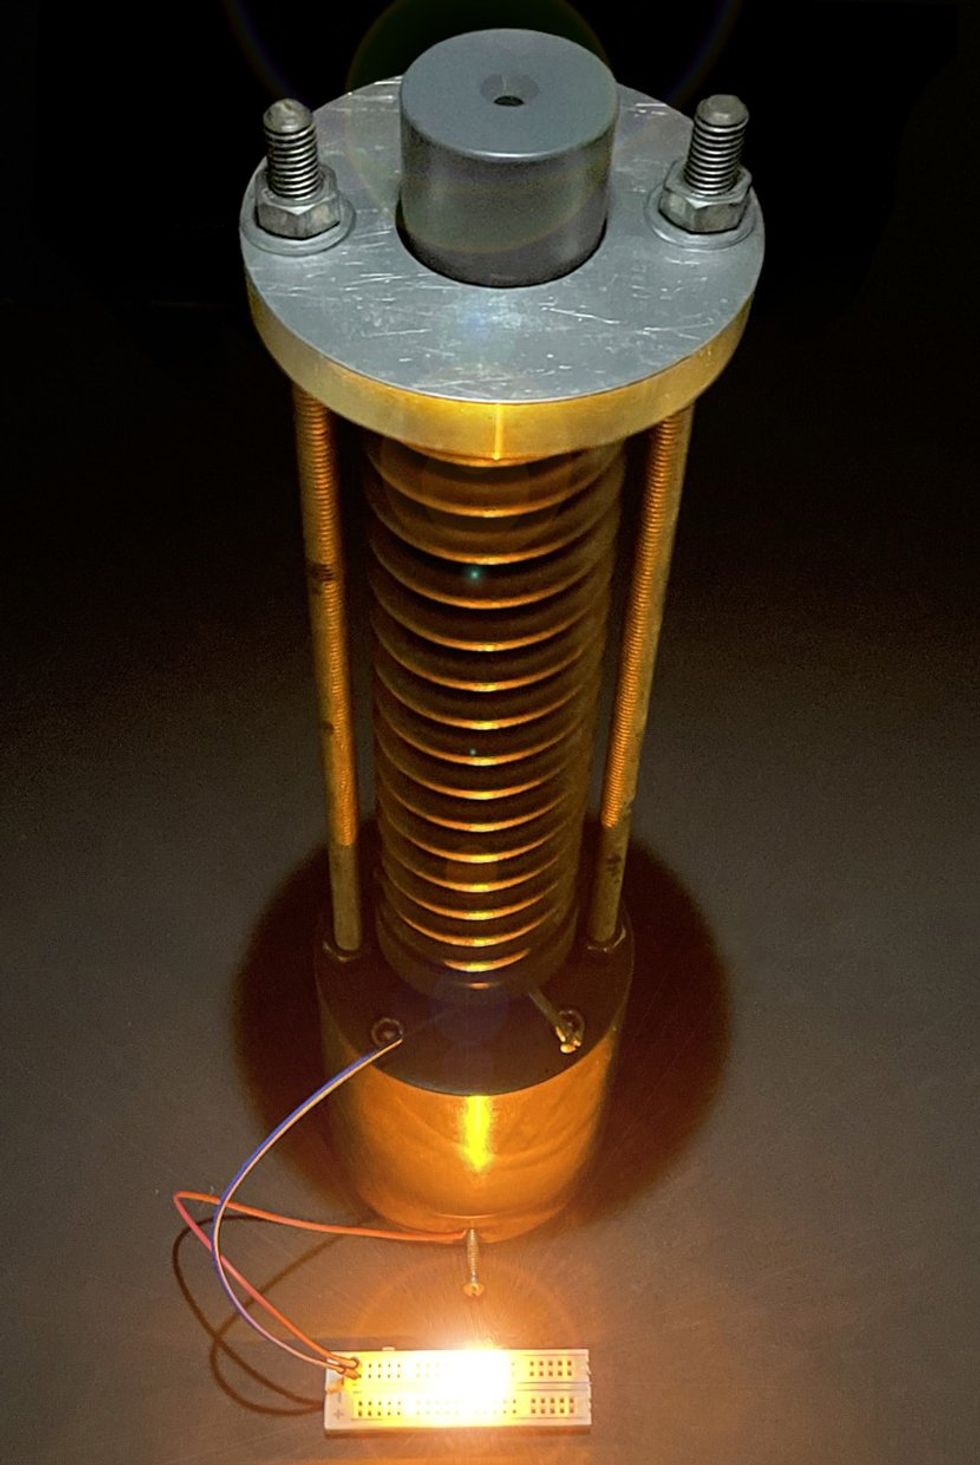 A tower of connected disks with a metal top and bottom connecting them, and wires linked to a glowing LED on a bread board.